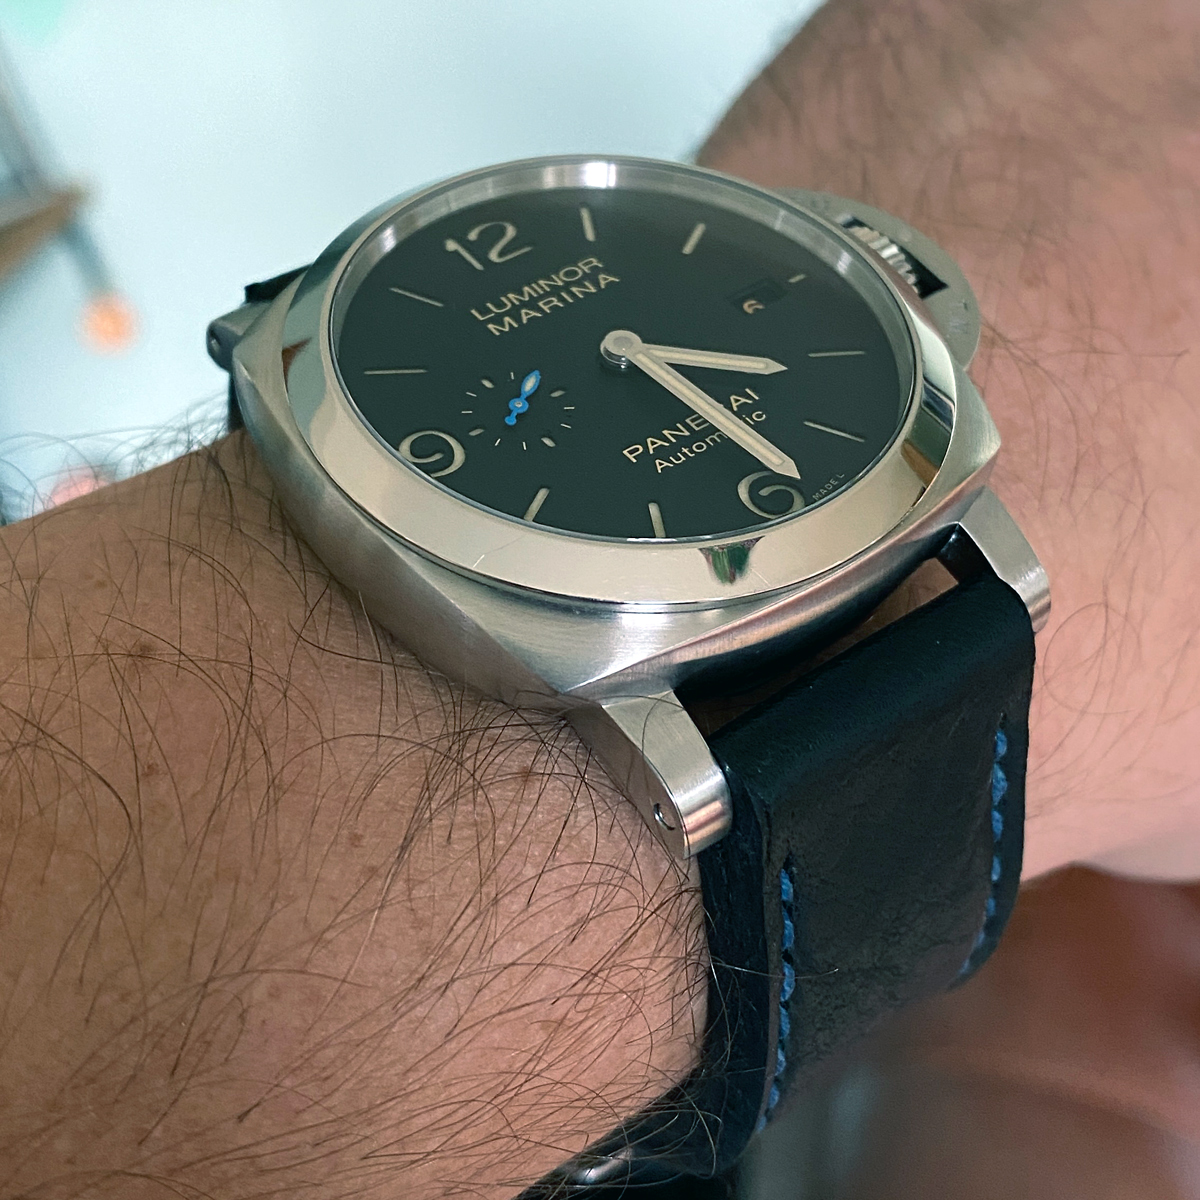 Panerai 1312 on Nero leather with royal blue stitching. © Dave Todd